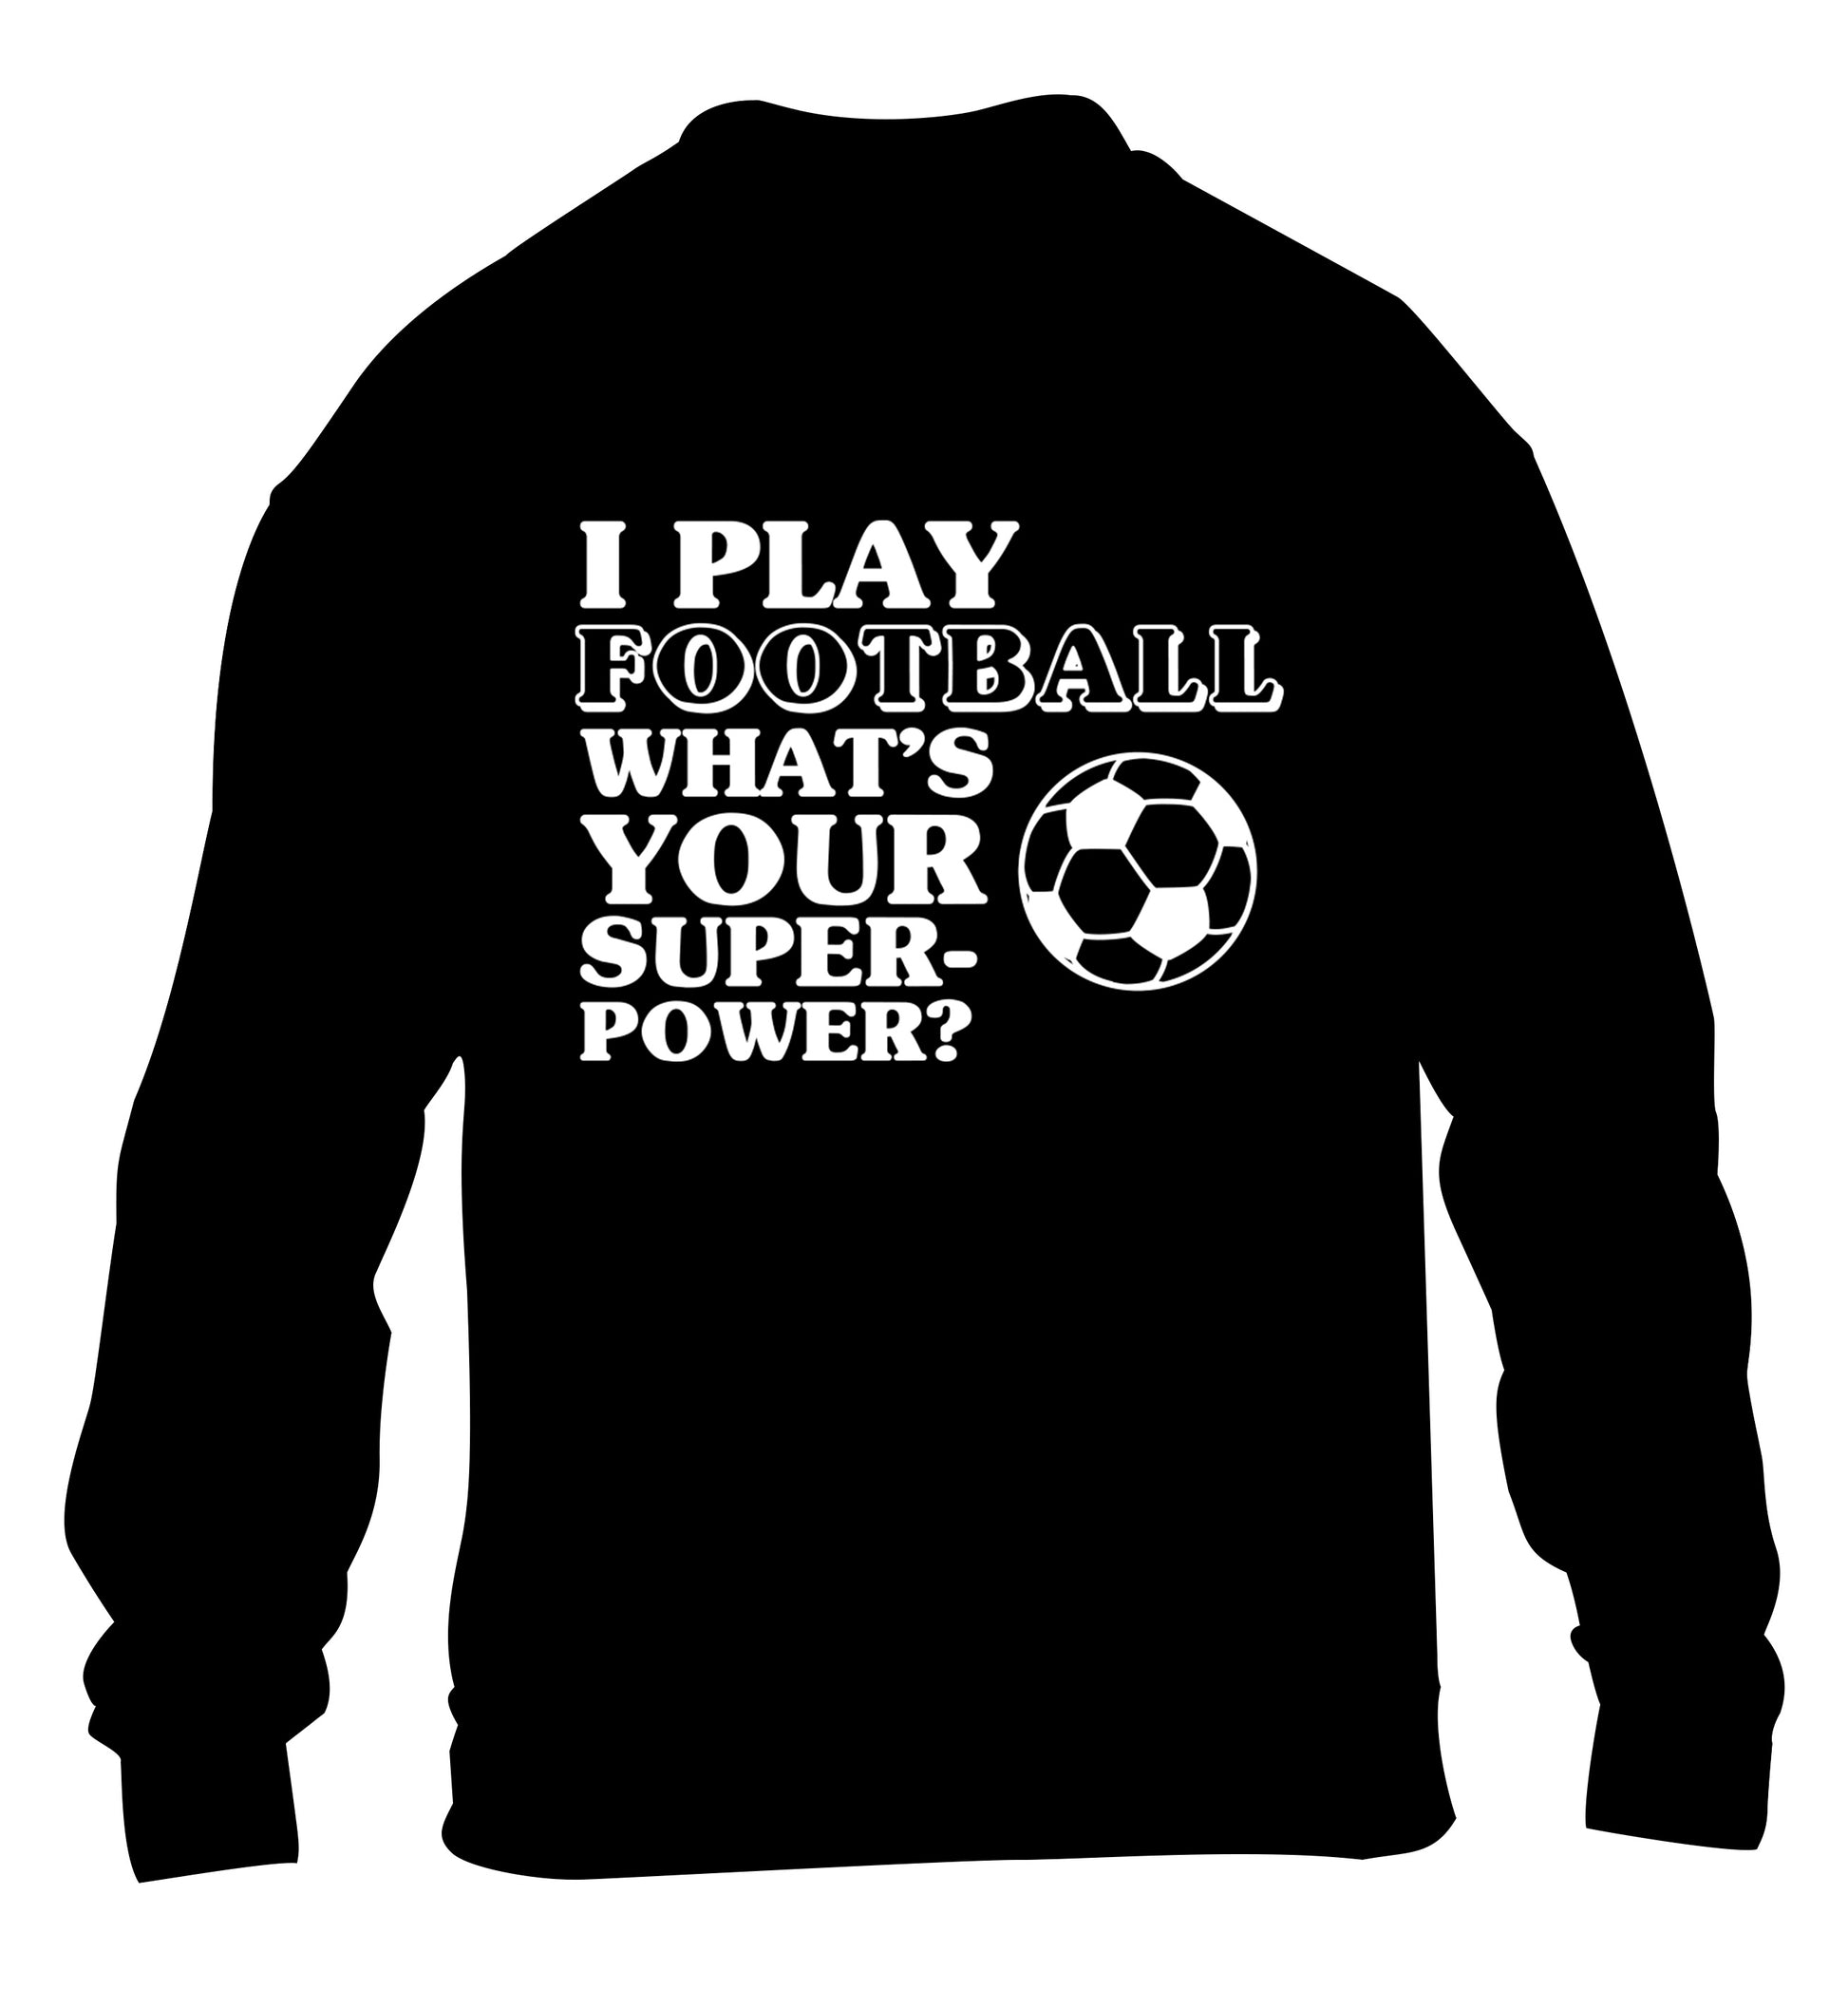 I play football what's your superpower? children's black sweater 12-14 Years